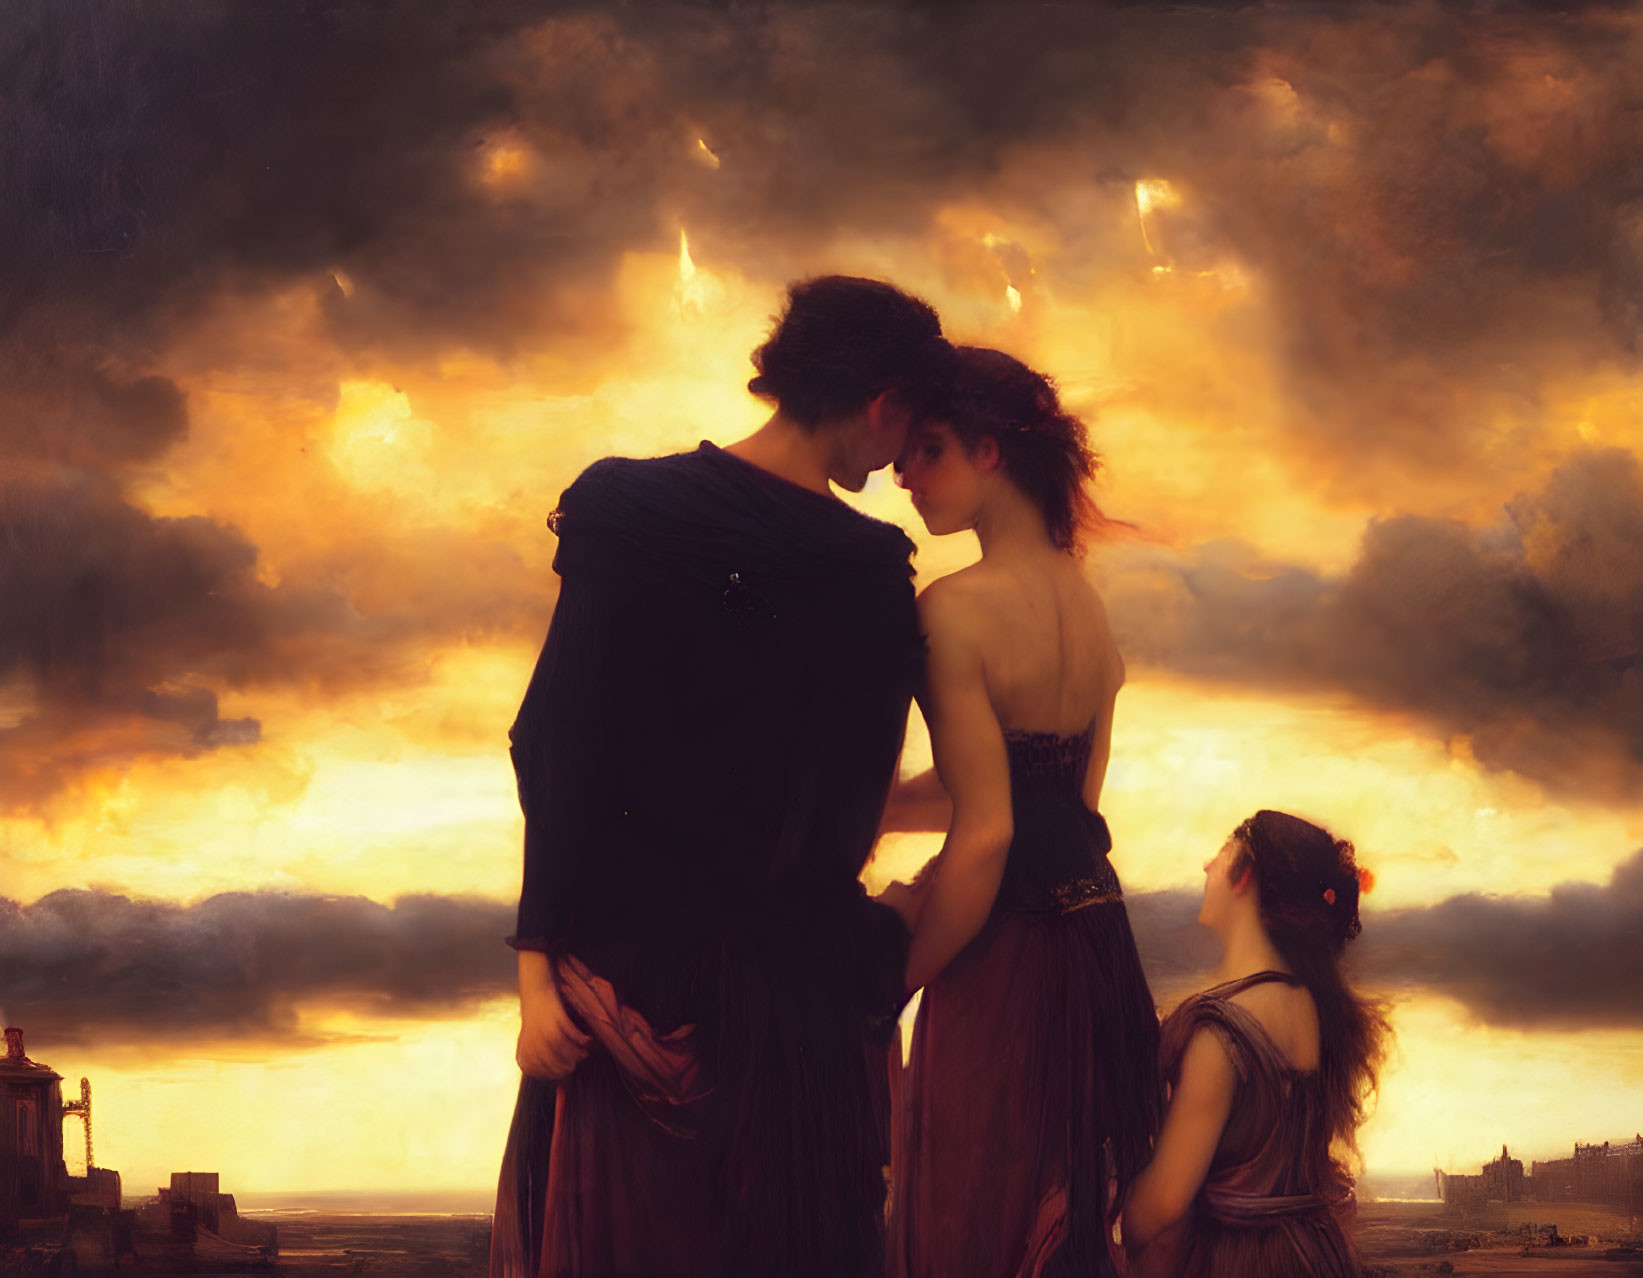 Three people in classical attire against dramatic sunset sky